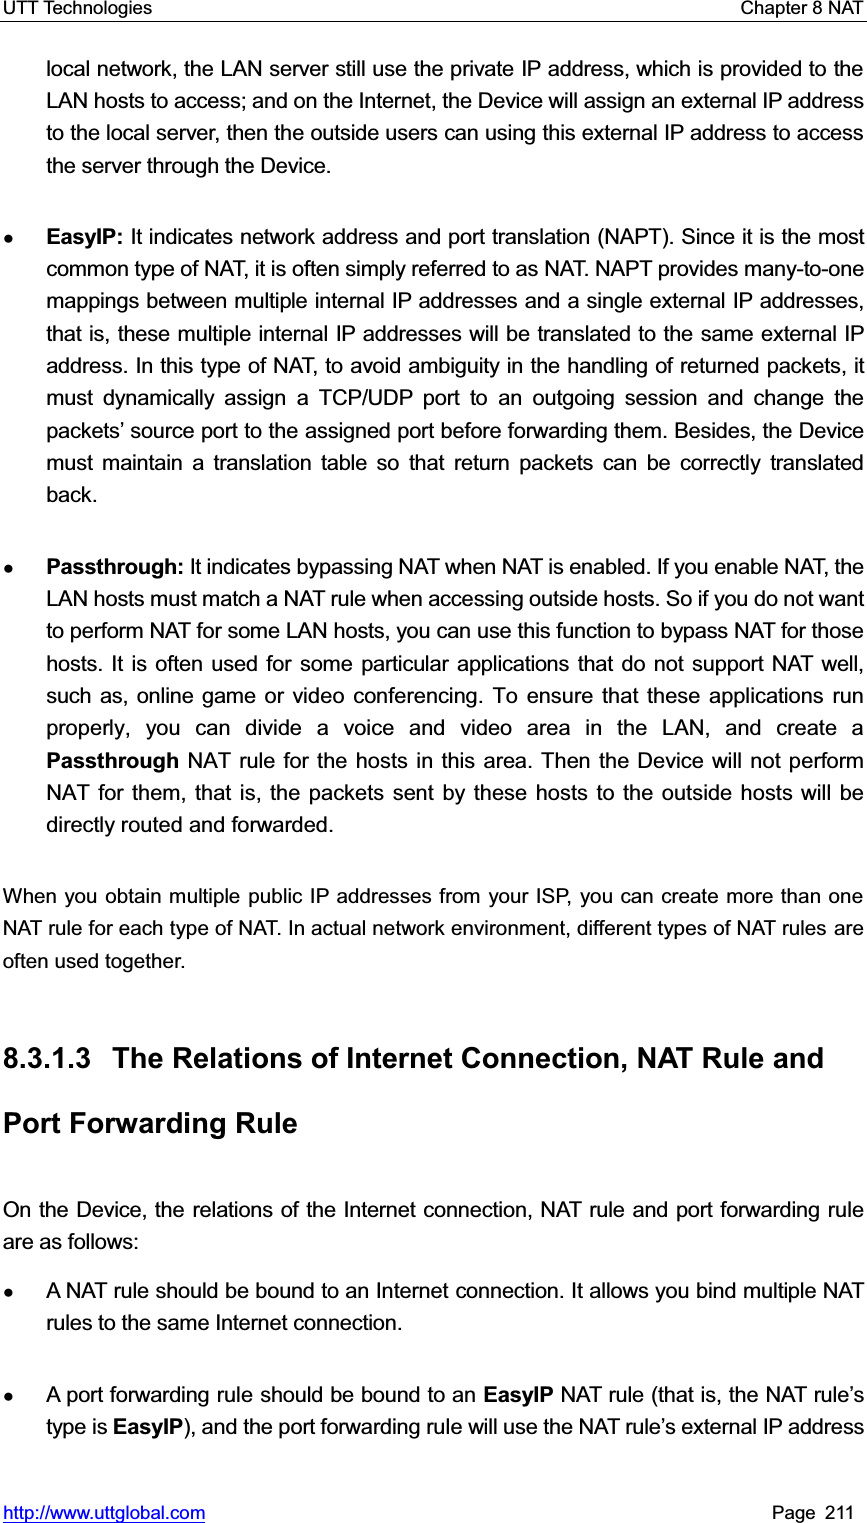 UTT Technologies    Chapter 8 NAT   http://www.uttglobal.com Page 211 local network, the LAN server still use the private IP address, which is provided to the LAN hosts to access; and on the Internet, the Device will assign an external IP address to the local server, then the outside users can using this external IP address to access the server through the Device. ƔEasyIP: It indicates network address and port translation (NAPT). Since it is the most common type of NAT, it is often simply referred to as NAT. NAPT provides many-to-one mappings between multiple internal IP addresses and a single external IP addresses, that is, these multiple internal IP addresses will be translated to the same external IP address. In this type of NAT, to avoid ambiguity in the handling of returned packets, it must dynamically assign a TCP/UDP port to an outgoing session and change the packets¶ source port to the assigned port before forwarding them. Besides, the Device must maintain a translation table so that return packets can be correctly translated back.  ƔPassthrough: It indicates bypassing NAT when NAT is enabled. If you enable NAT, the LAN hosts must match a NAT rule when accessing outside hosts. So if you do not want to perform NAT for some LAN hosts, you can use this function to bypass NAT for those hosts. It is often used for some particular applications that do not support NAT well, such as, online game or video conferencing. To ensure that these applications run properly, you can divide a voice and video area in the LAN, and create a Passthrough NAT rule for the hosts in this area. Then the Device will not perform NAT for them, that is, the packets sent by these hosts to the outside hosts will be directly routed and forwarded.   When you obtain multiple public IP addresses from your ISP, you can create more than one NAT rule for each type of NAT. In actual network environment, different types of NAT rules are often used together.   8.3.1.3  The Relations of Internet Connection, NAT Rule and Port Forwarding Rule On the Device, the relations of the Internet connection, NAT rule and port forwarding rule are as follows:   ƔA NAT rule should be bound to an Internet connection. It allows you bind multiple NAT rules to the same Internet connection. ƔA port forwarding rule should be bound to an EasyIP NAT rule (that is, the NAT rule¶stype is EasyIP), and the port forwarding rule will use the NAT UXOH¶s external IP address 